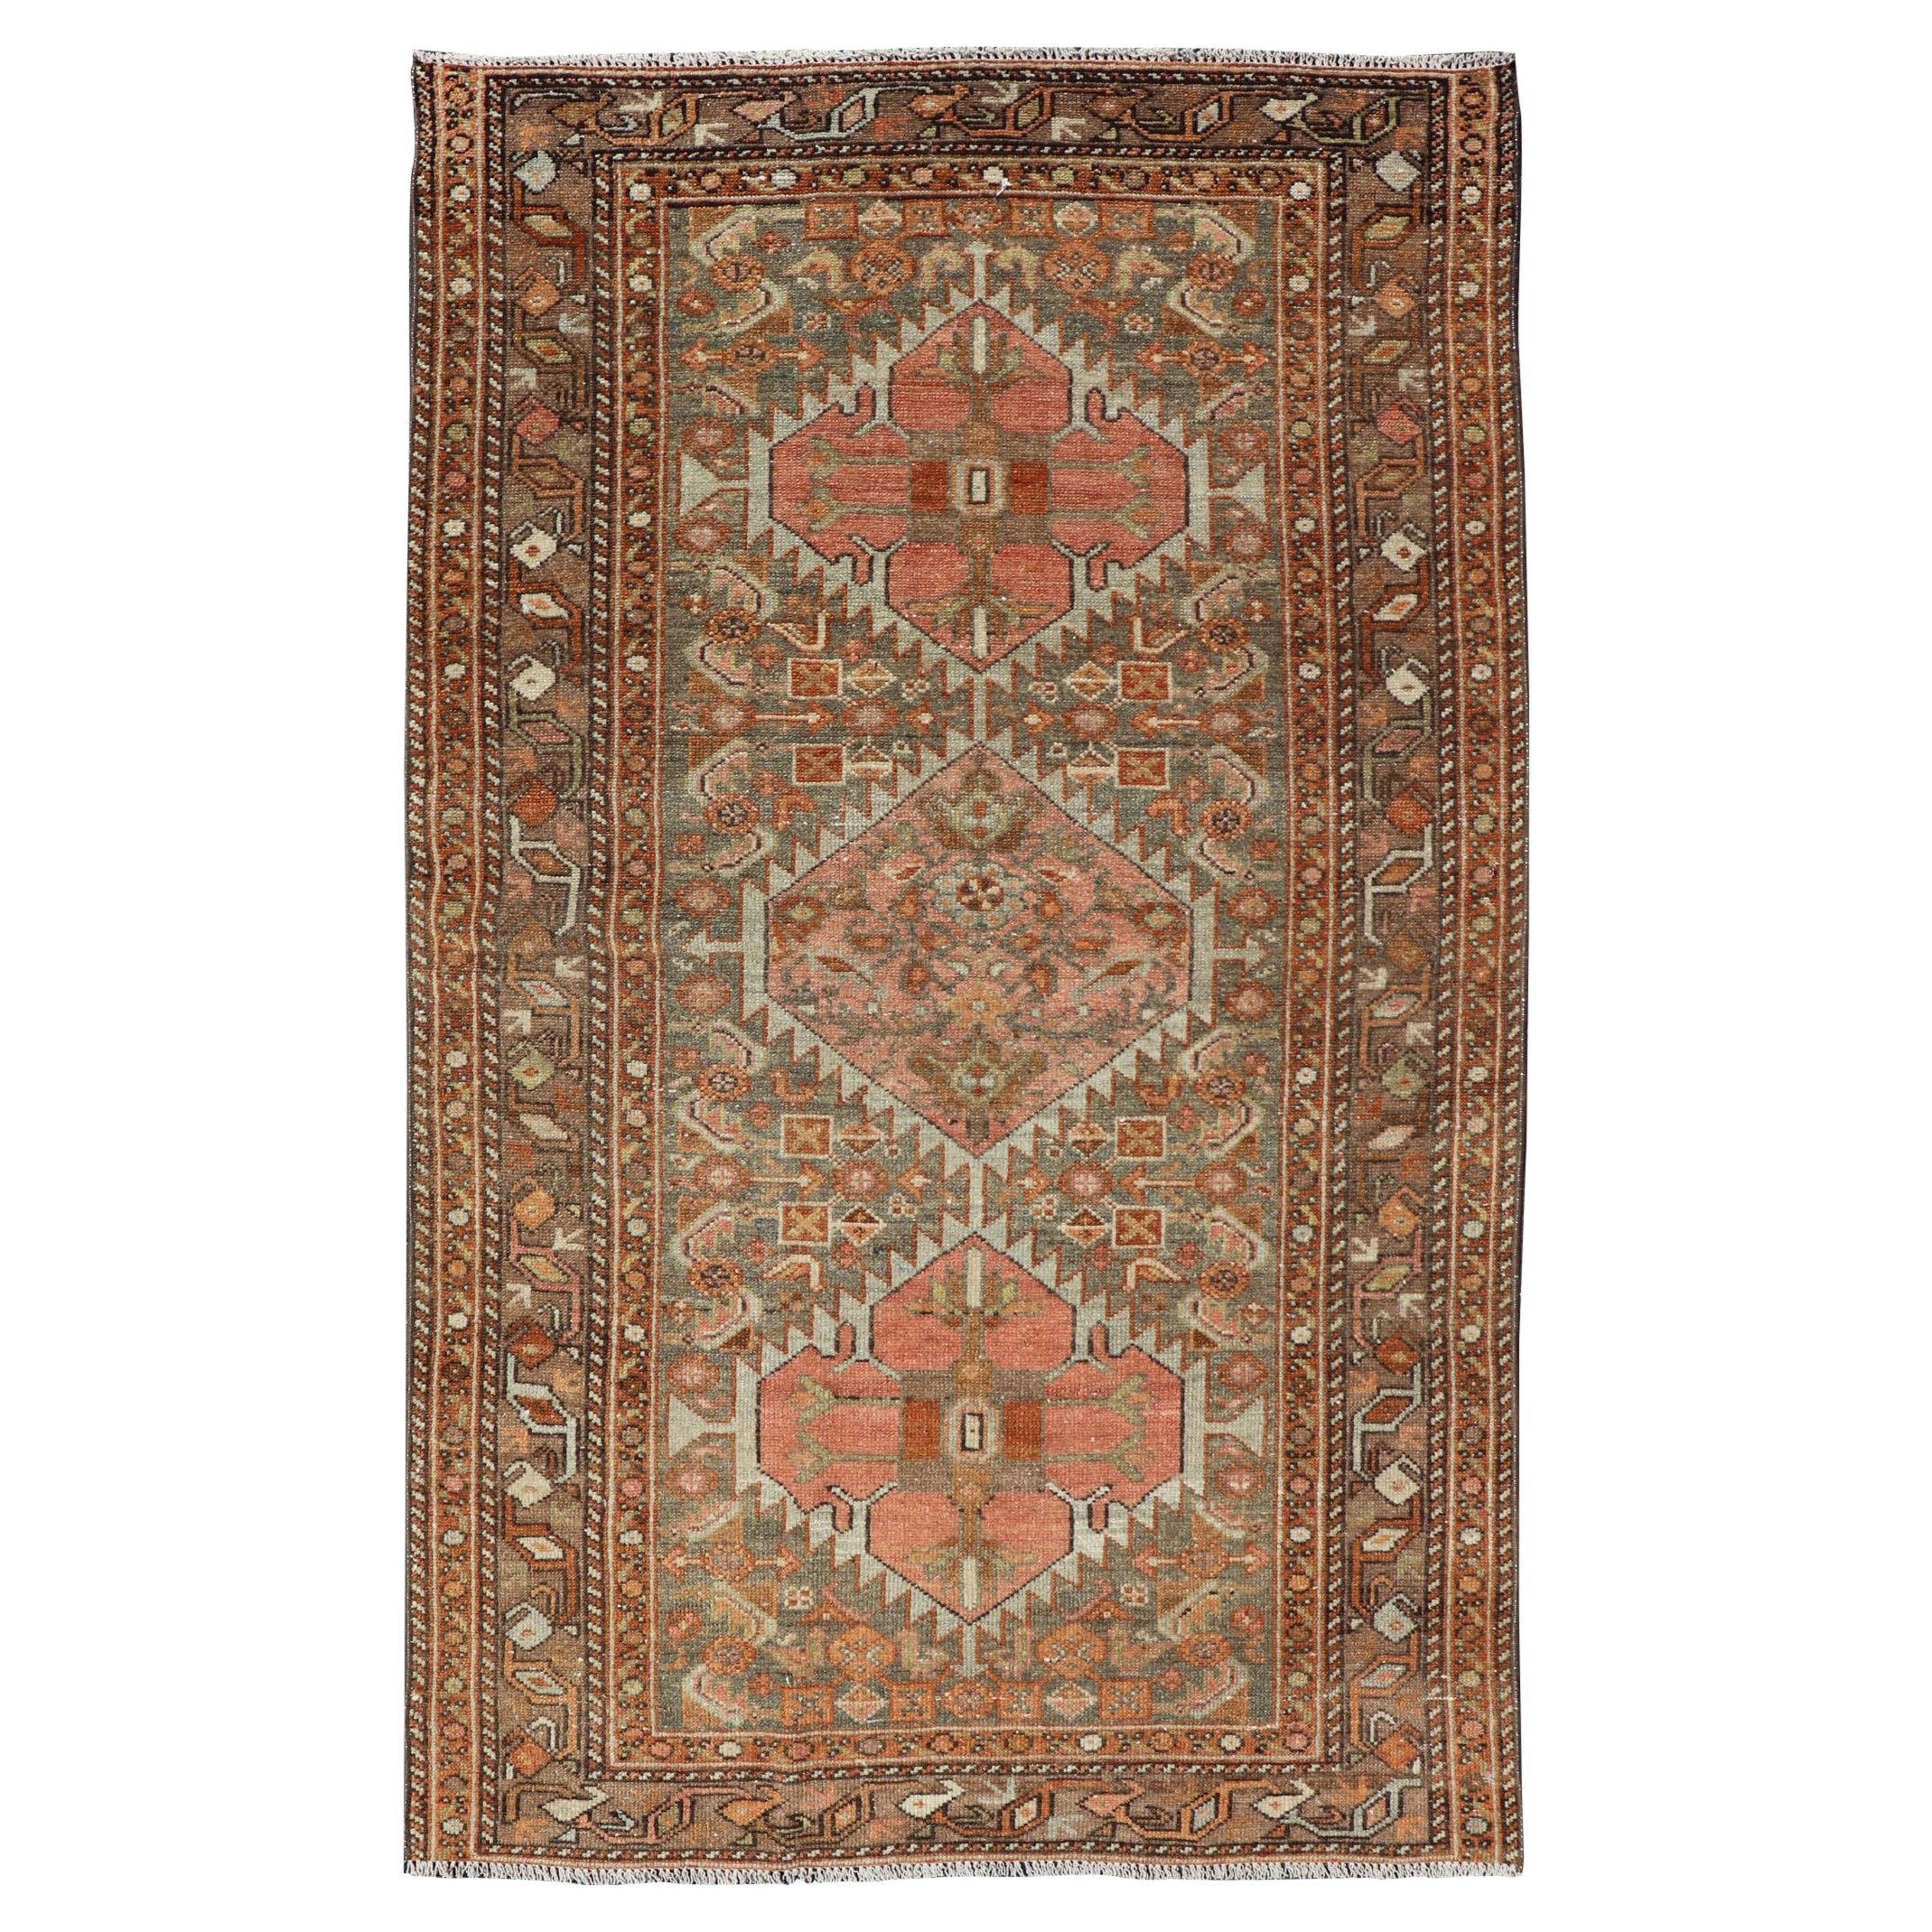 Antique Persian Hamedan in Rustic Earthy Tones With Tribal Medallions